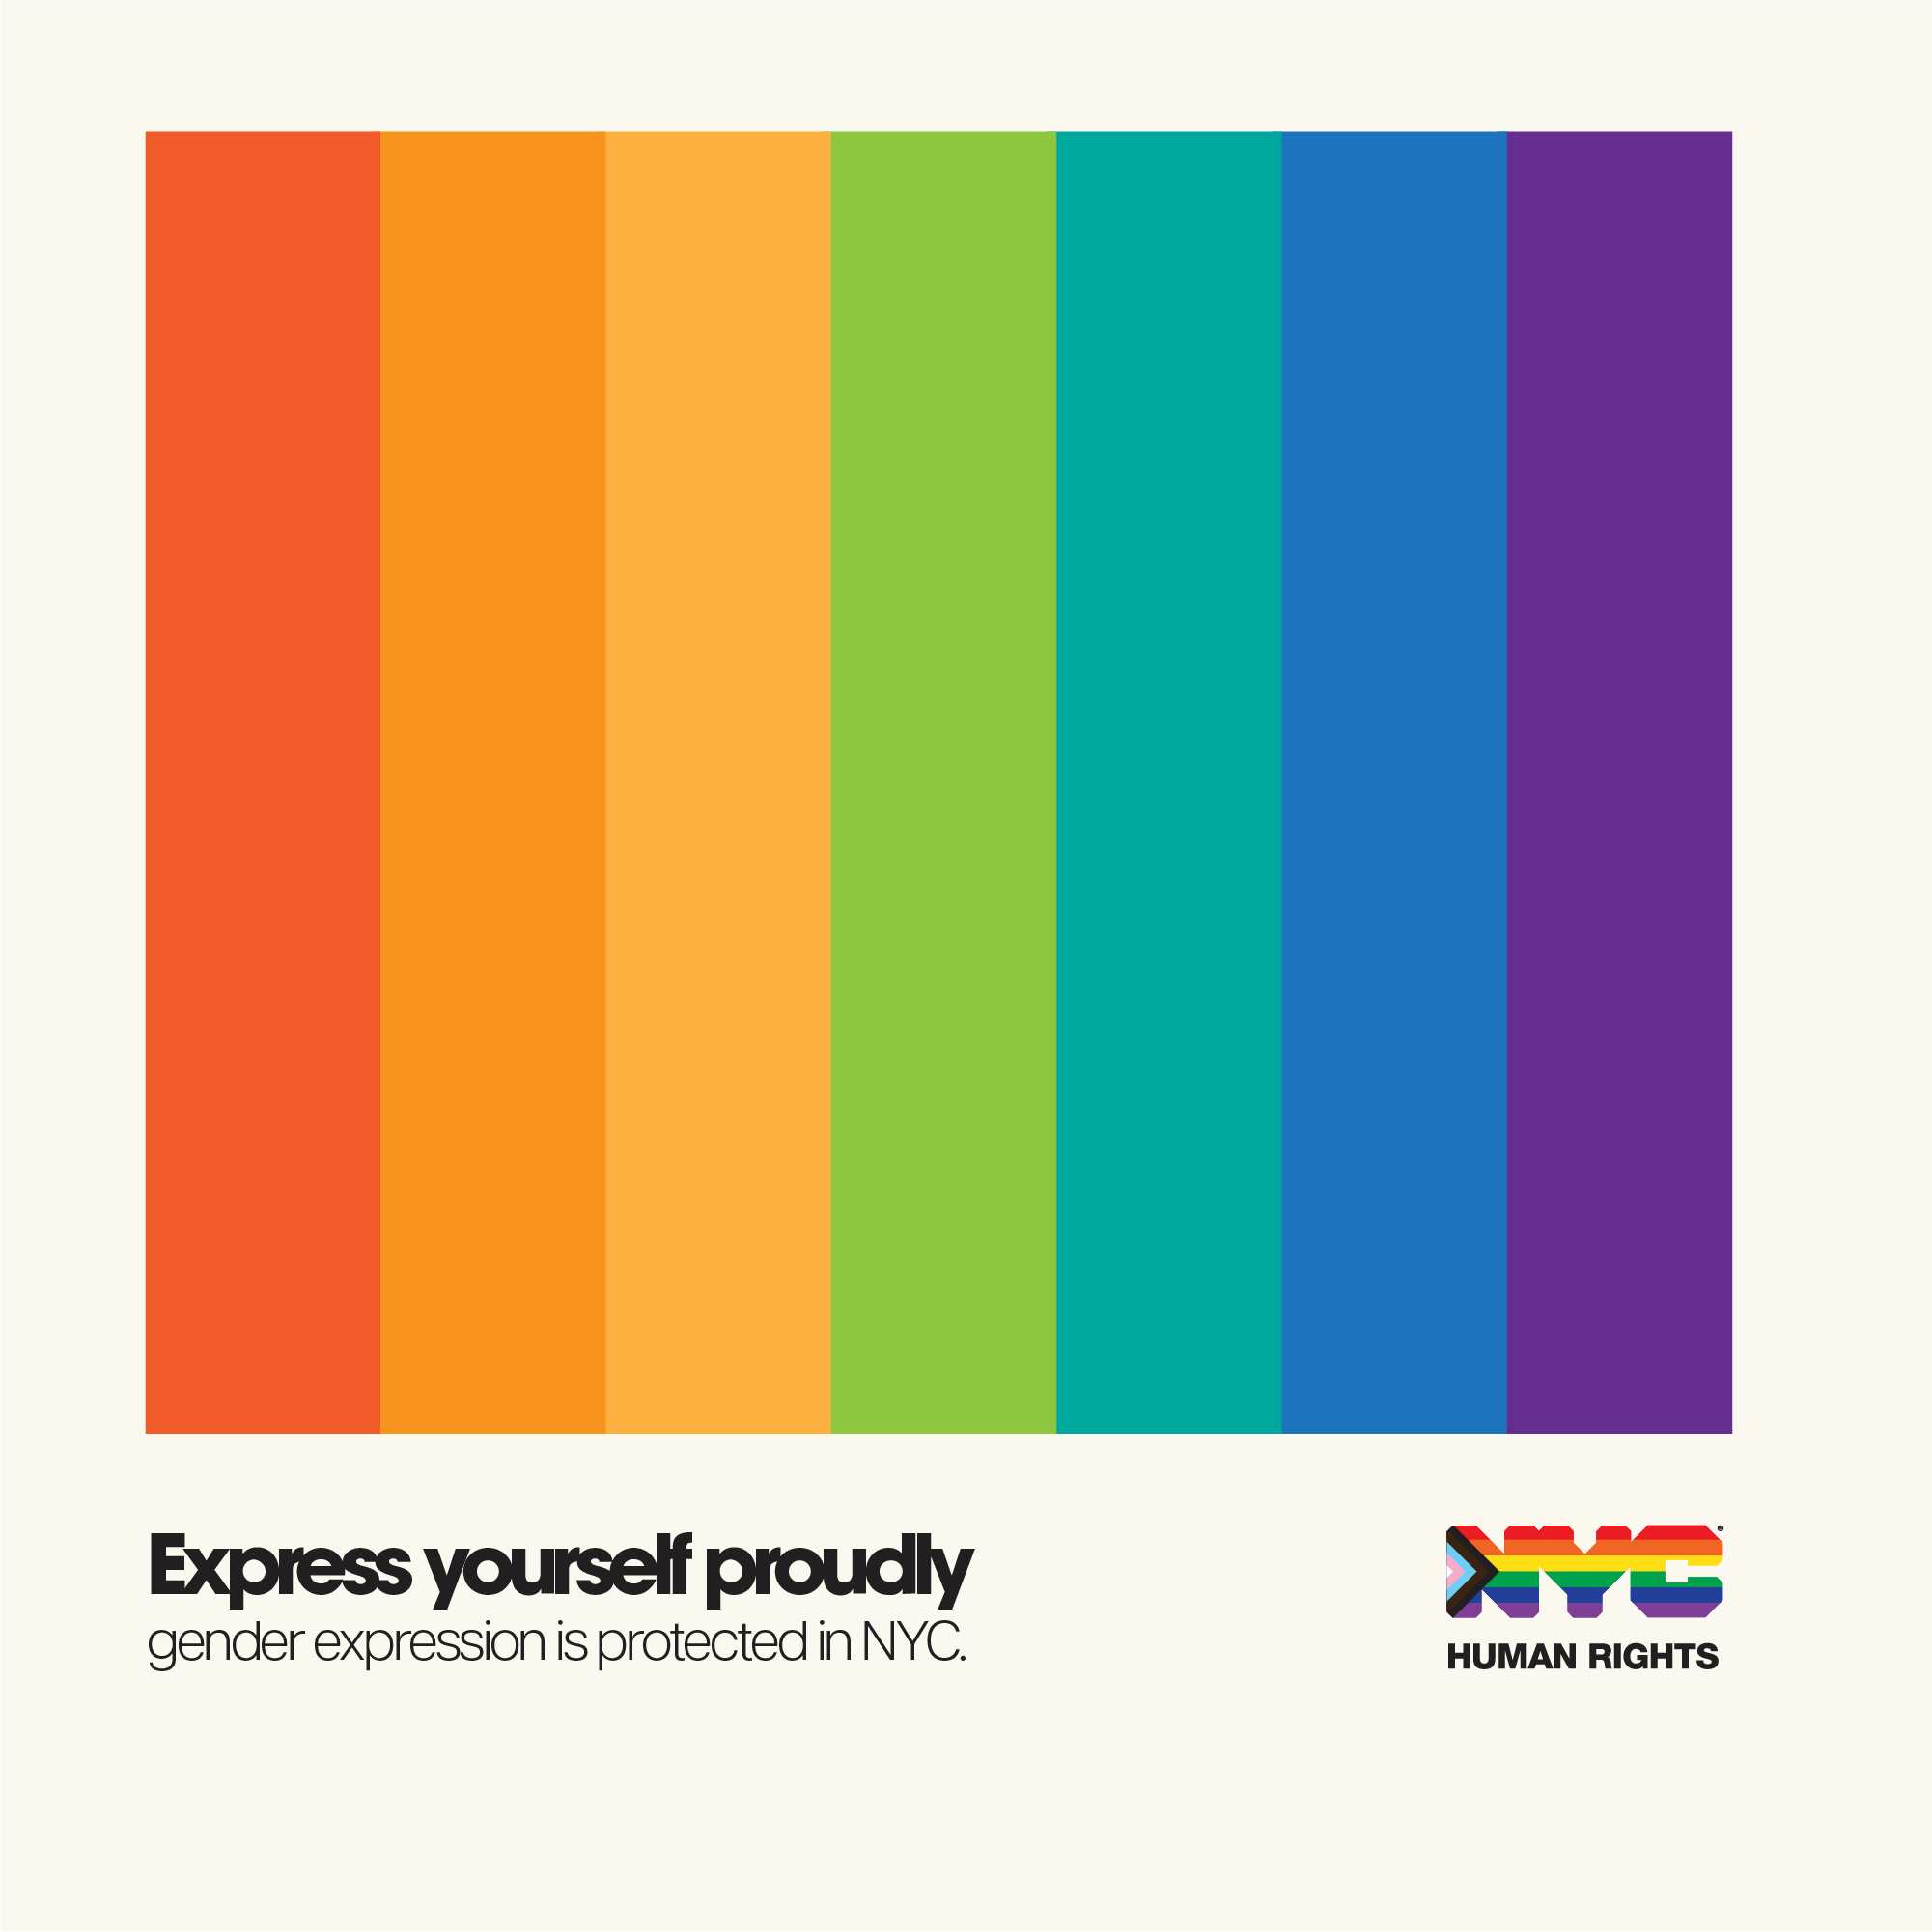 Express yourself proudly